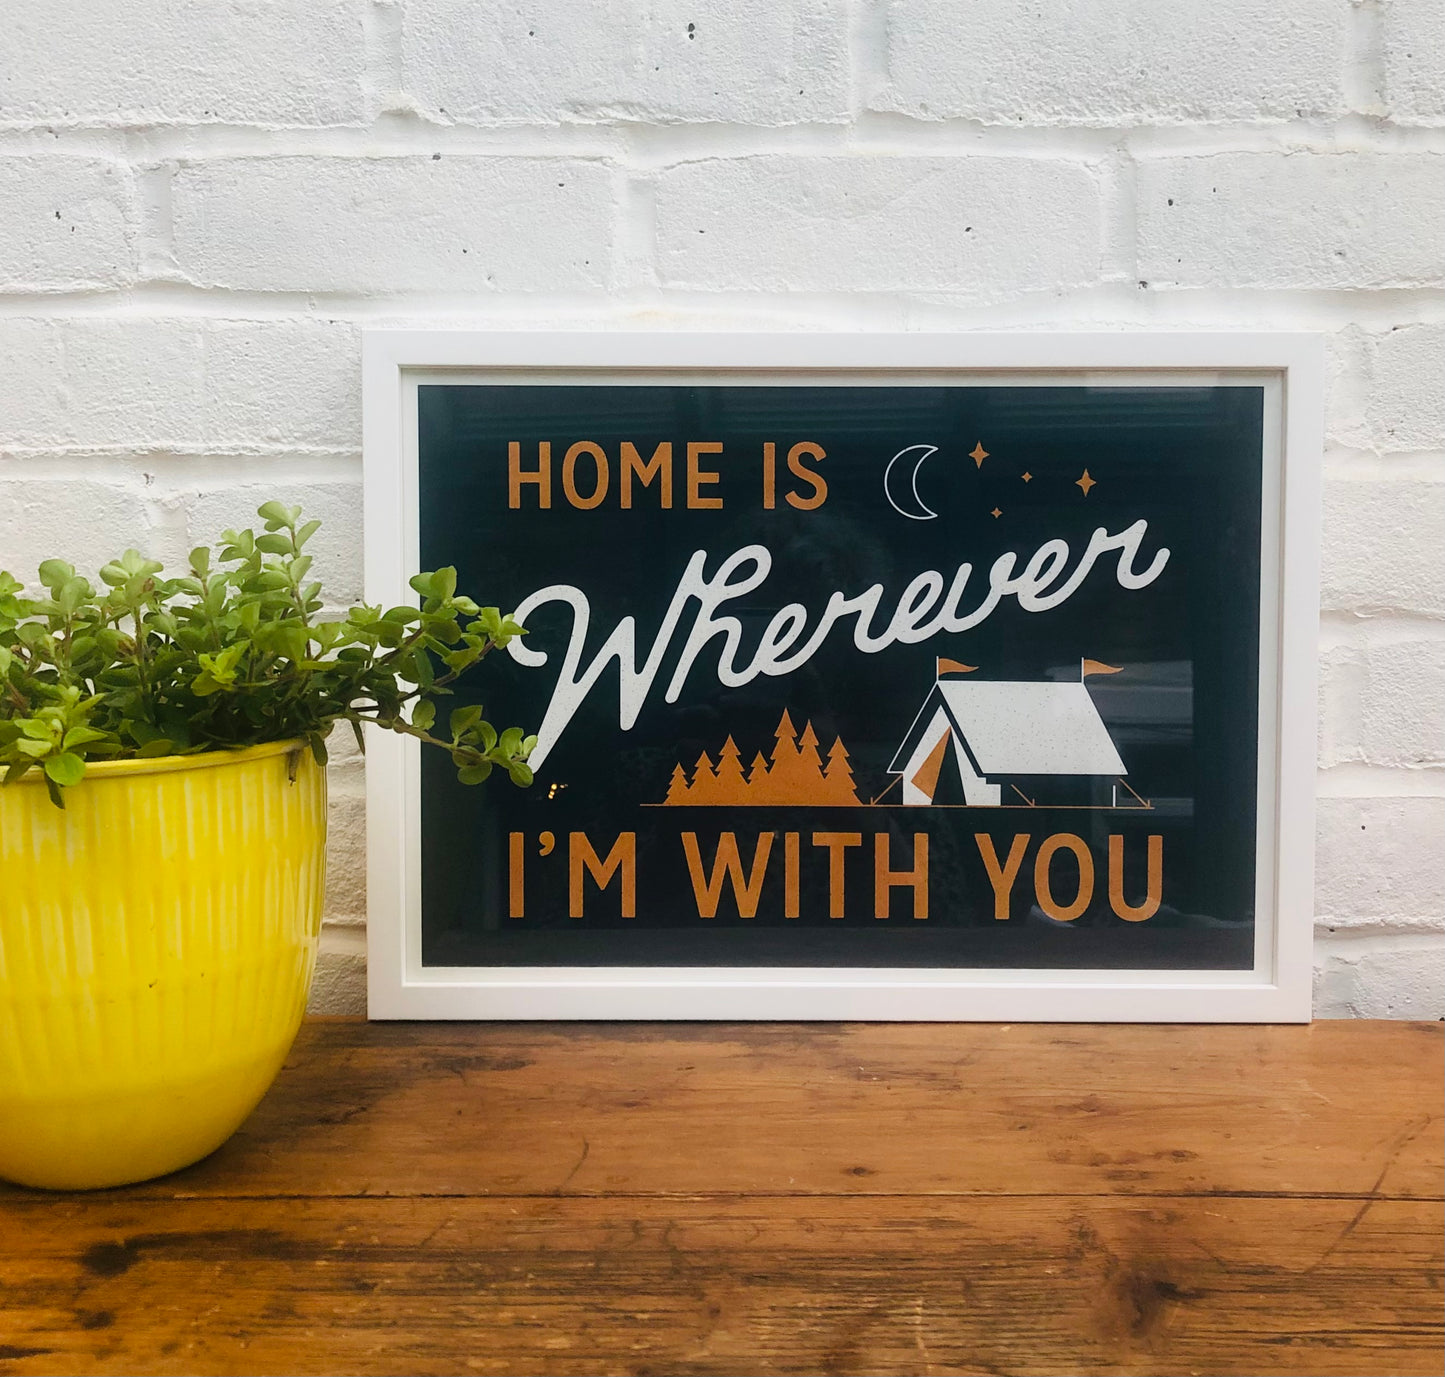 Home is wherever A3 print